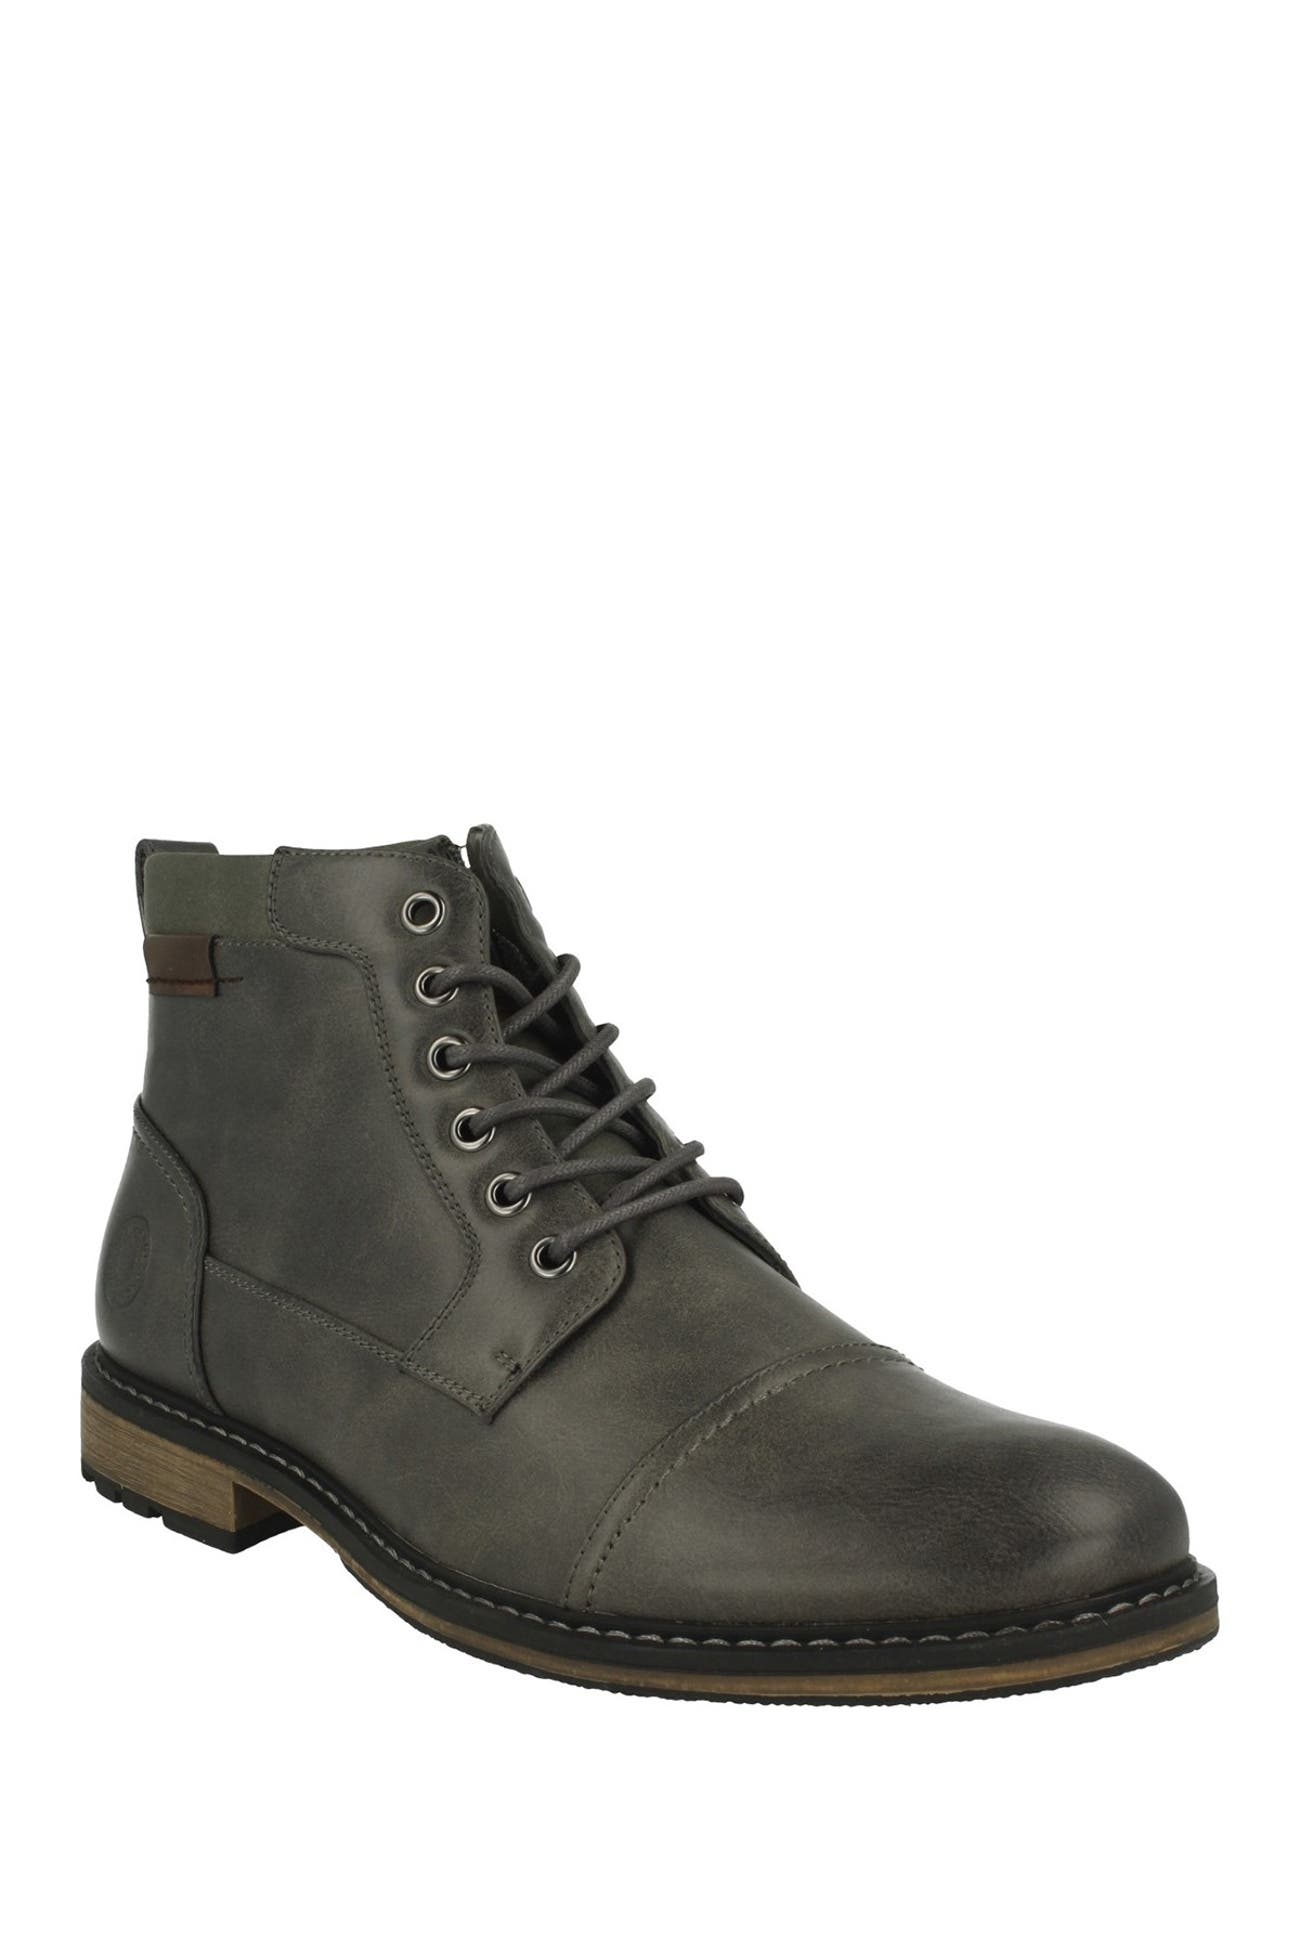 B52 by Bullboxer | Tylier Mid Cut Boot | Nordstrom Rack